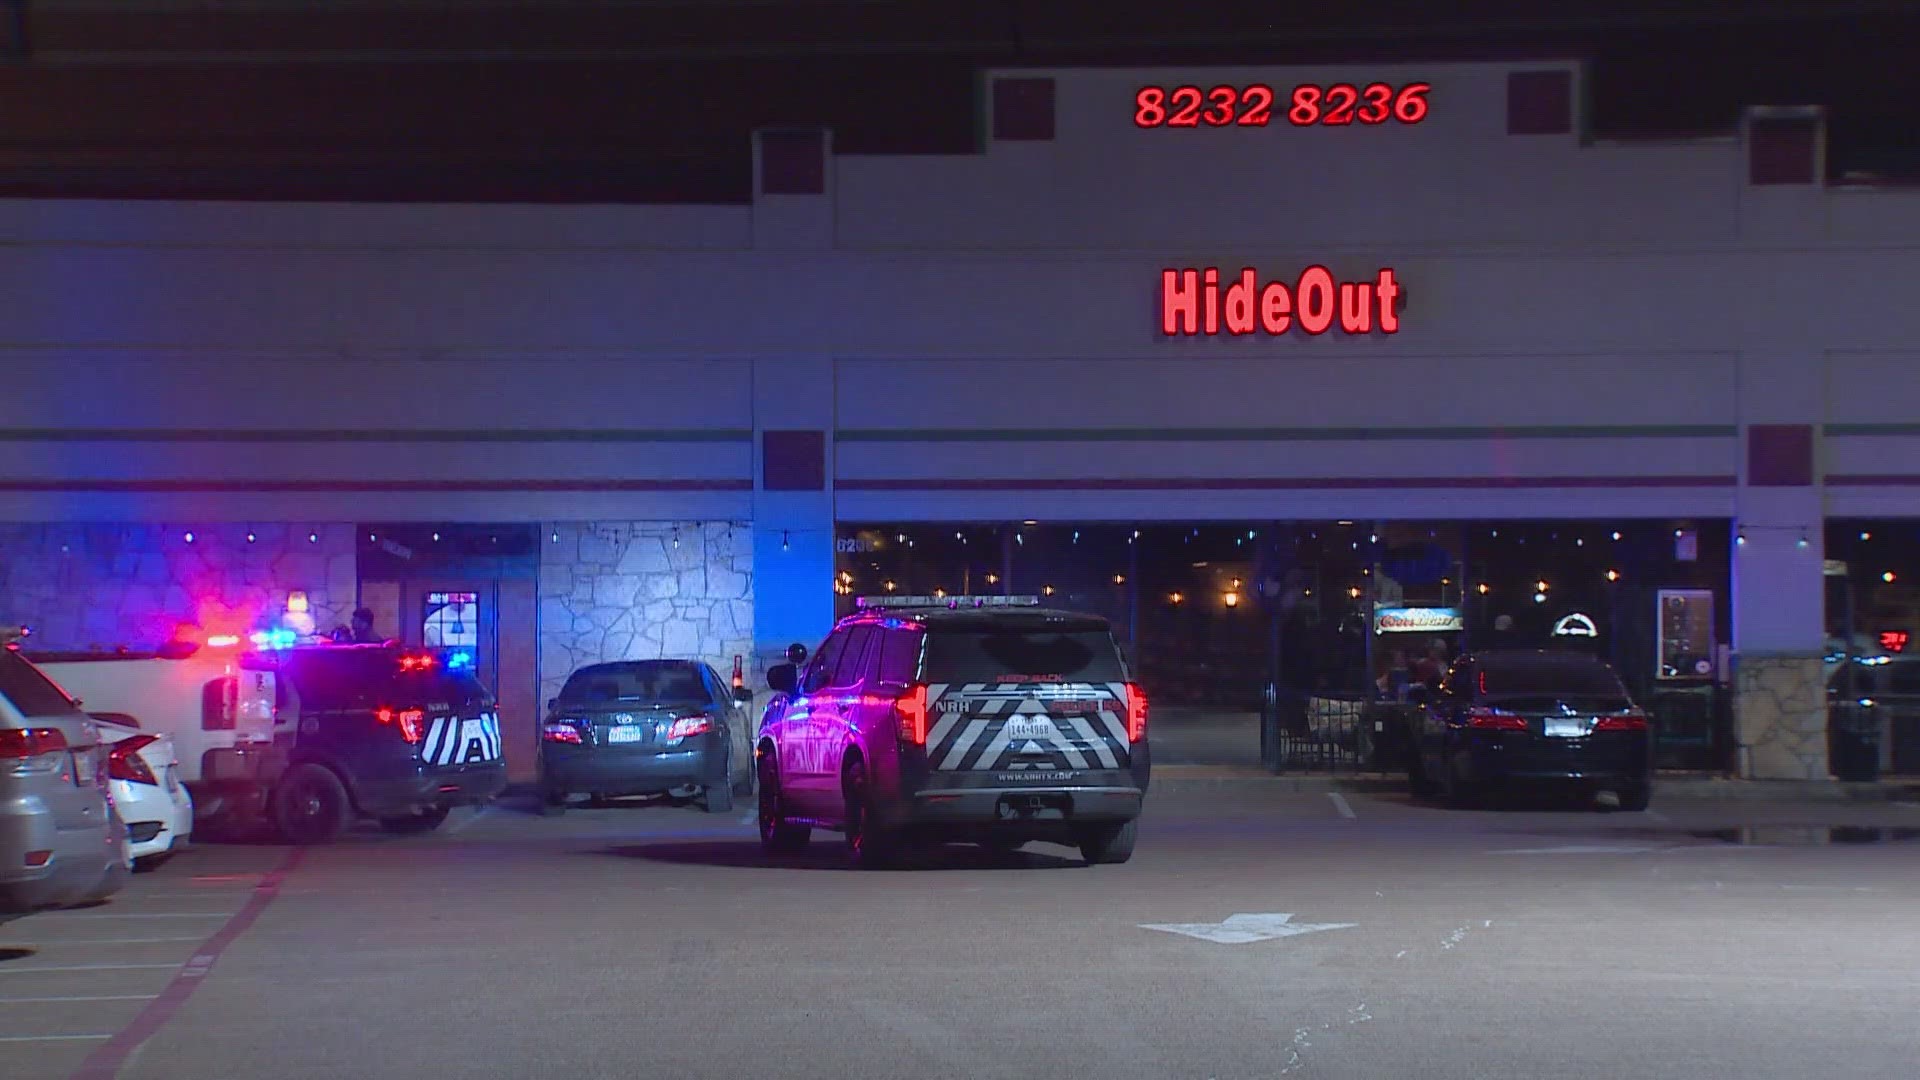 Police say the man was seen stabbing tires and patio furniture in the parking lot near The Hideout.